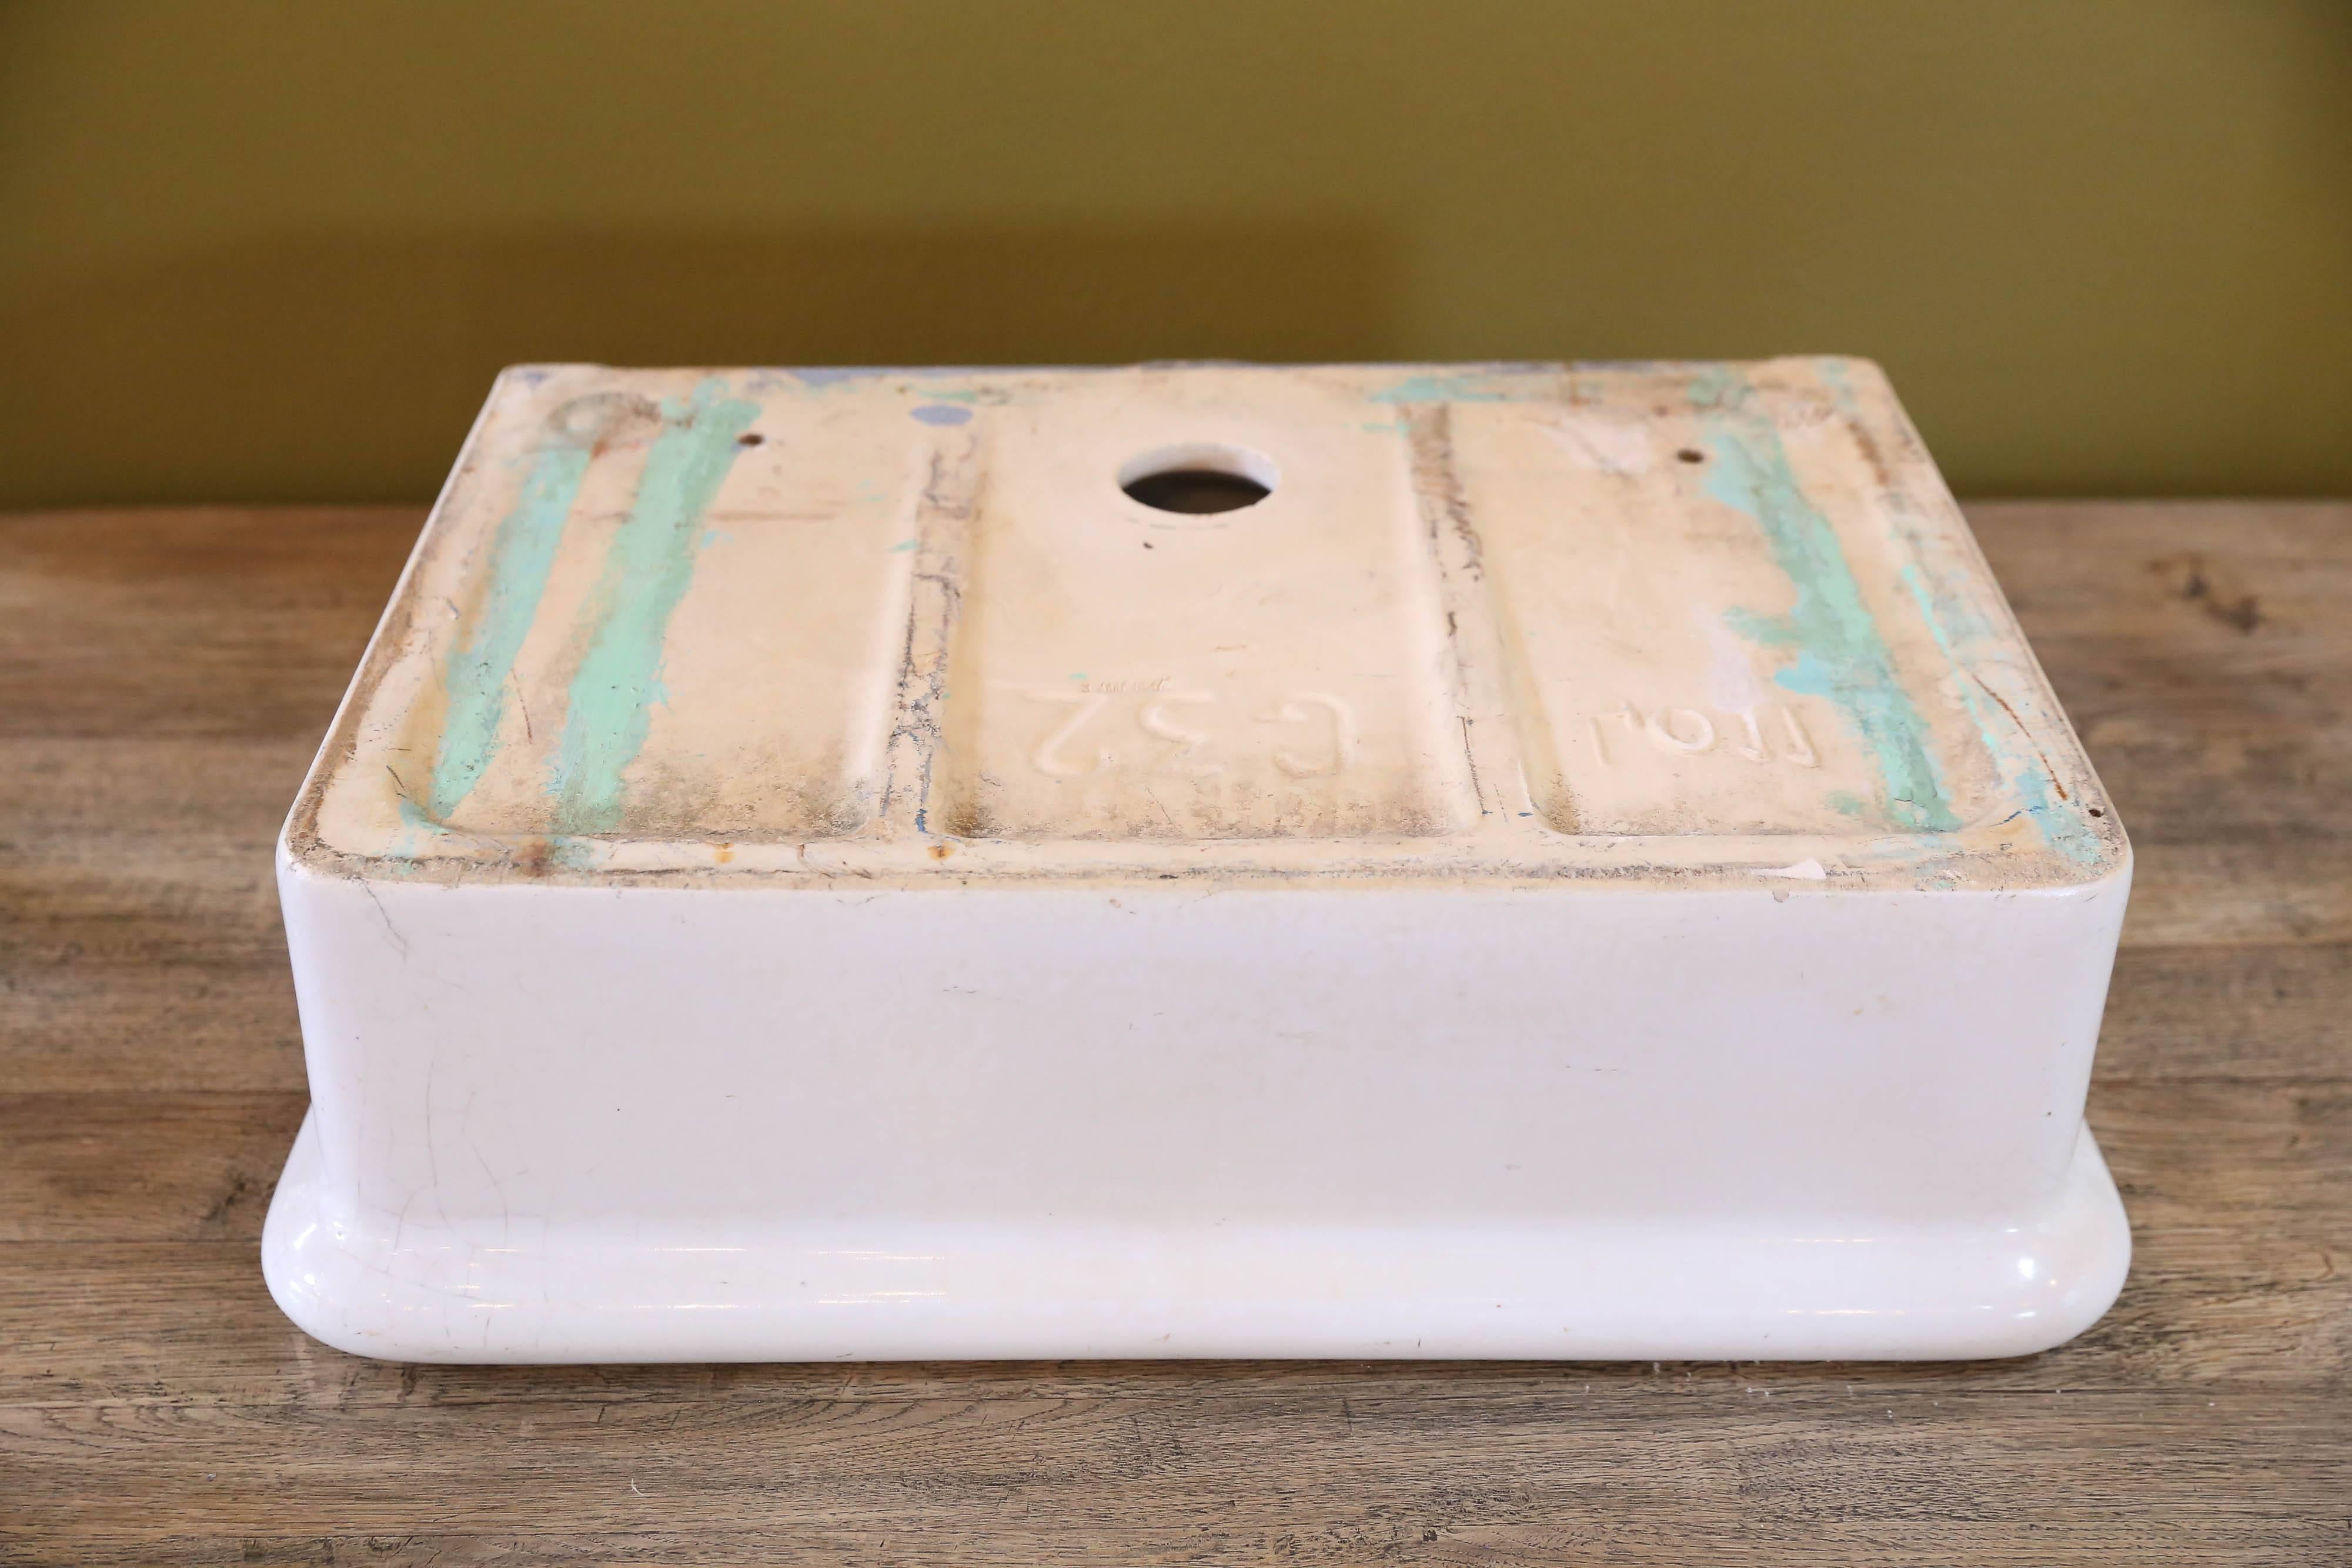 Antique white porcelain sink with drainage hole. From France, circa 1920. Flat back with rounded square edges. Inside of sink measures 5.5 inches deep.